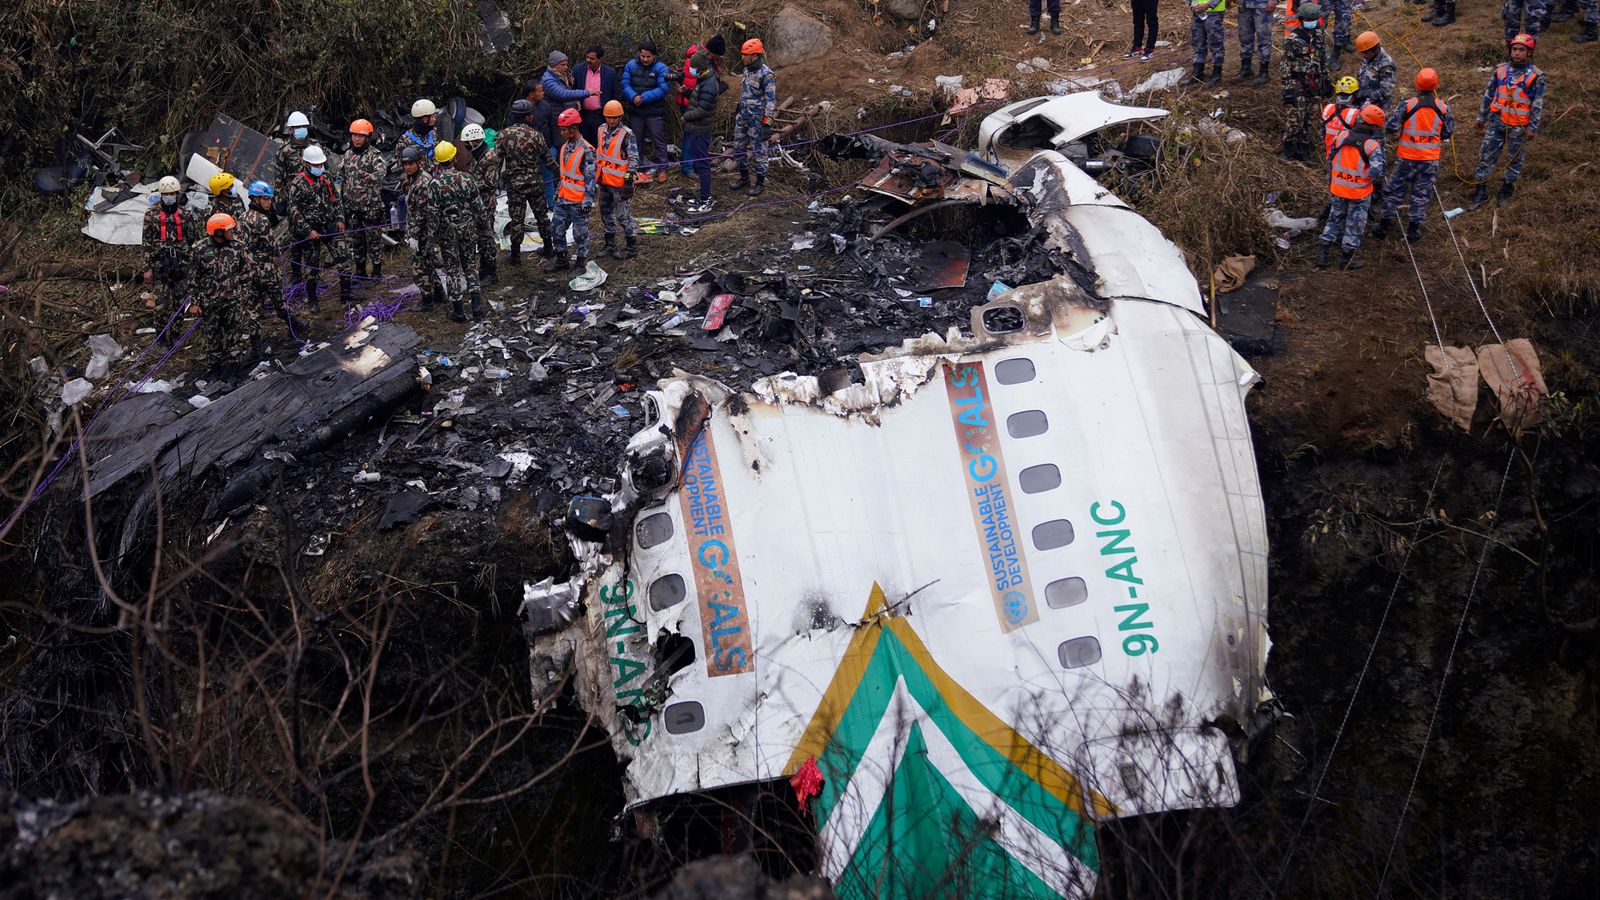 Nepal plane crash that killed 72 was caused by pilots accidentally cutting power, investigation